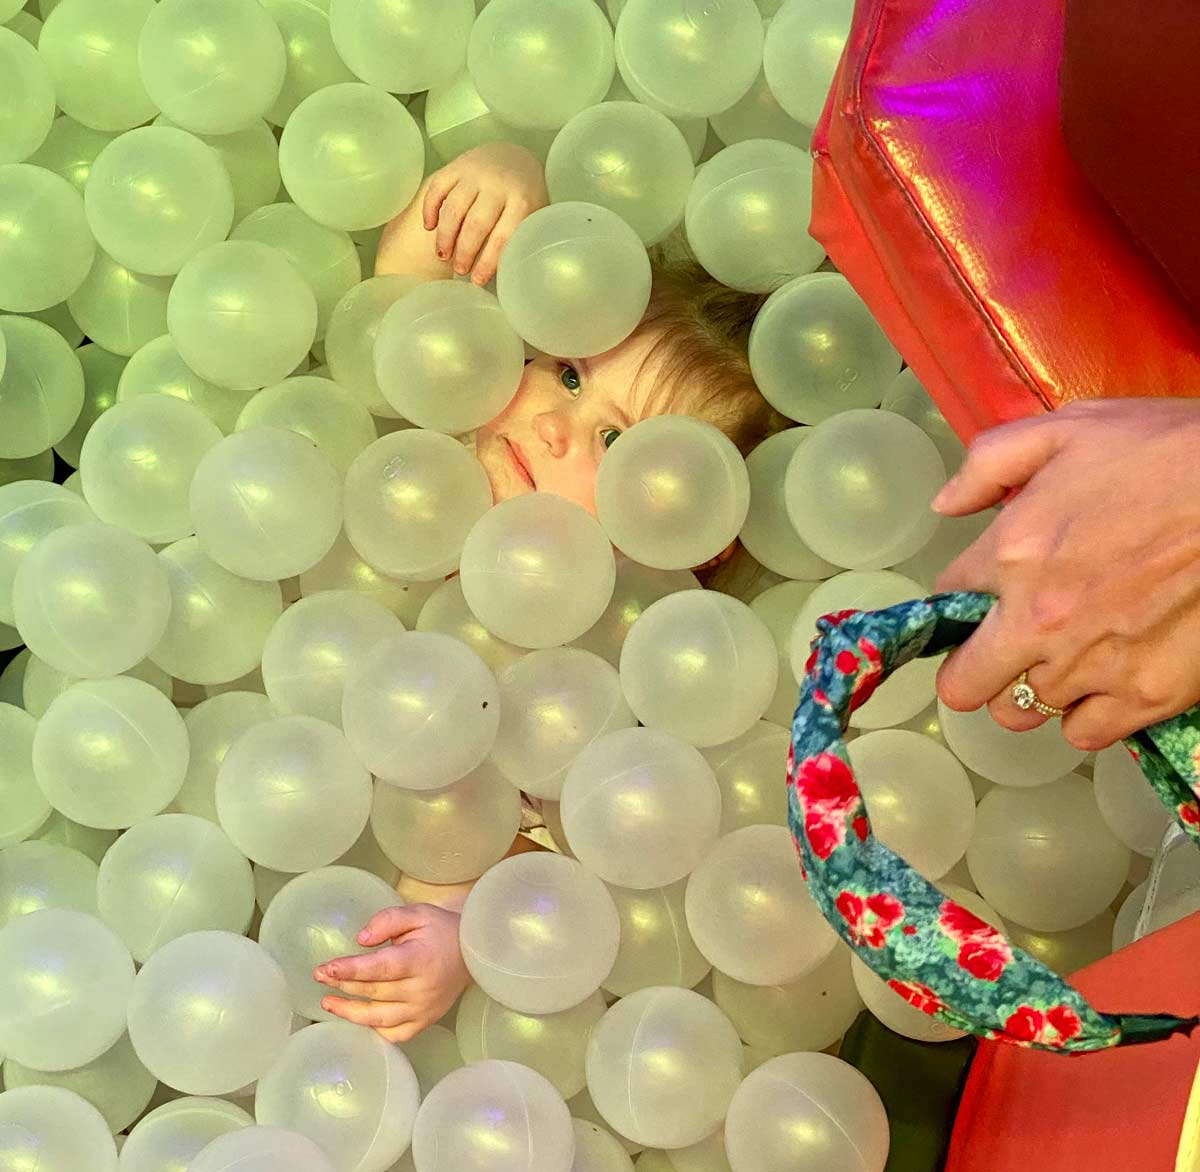 The ball pit made her rethink some life choices